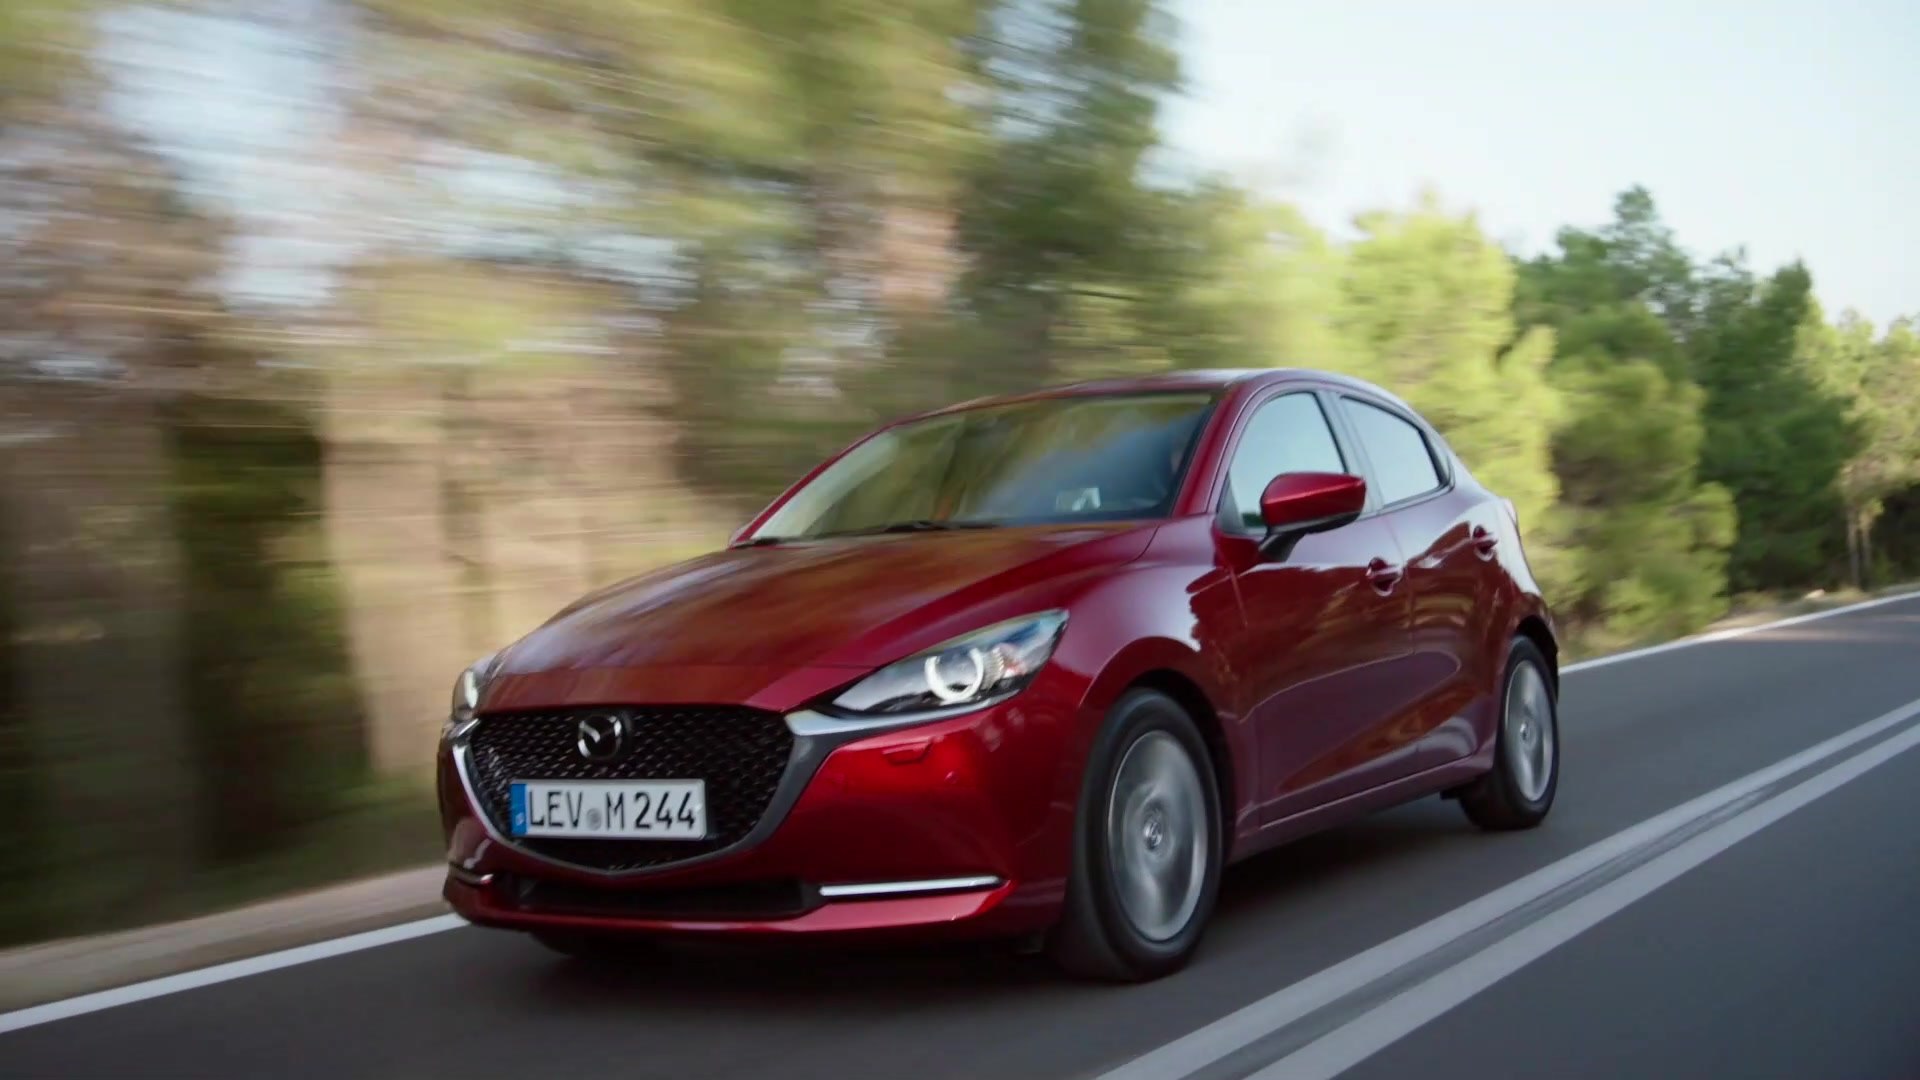 2022 Mazda 2 in Soul Red Crystal Driving Video - video Dailymotion